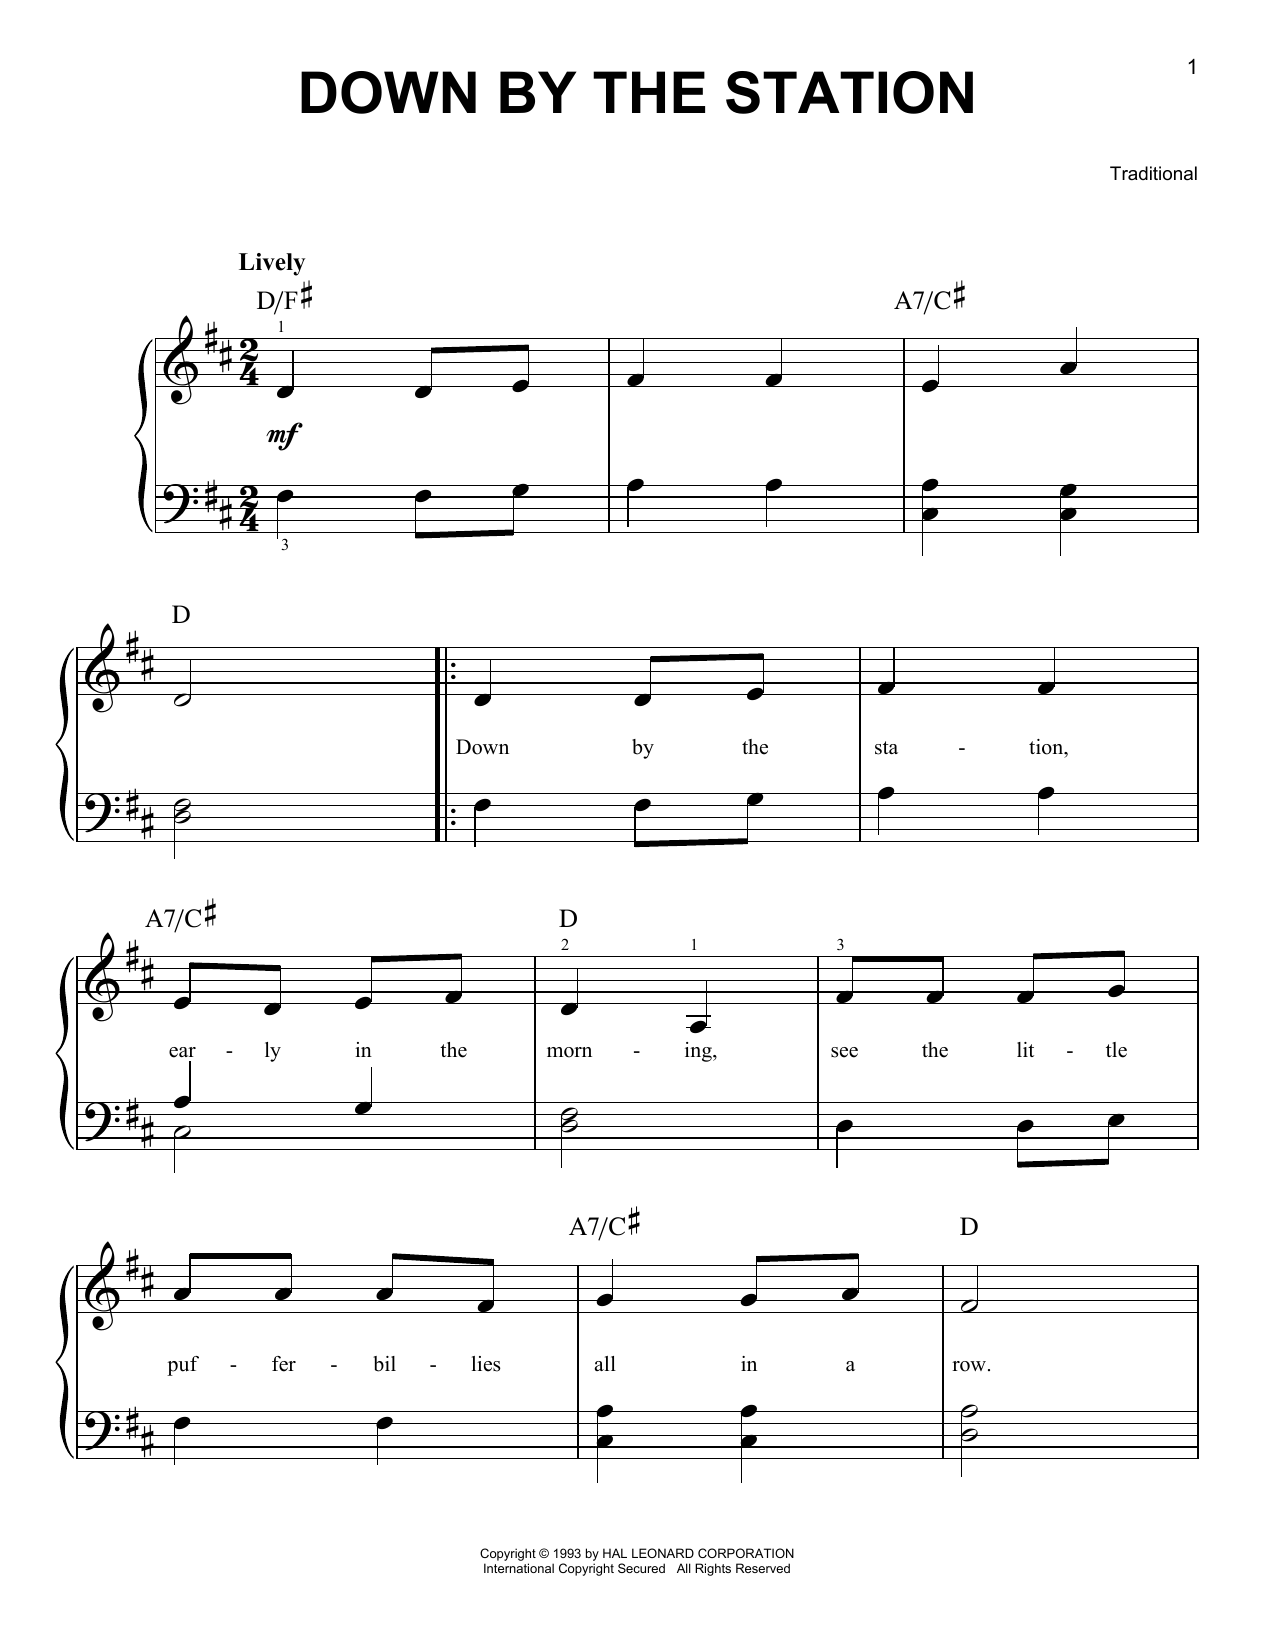 Download Traditional Down By The Station Sheet Music